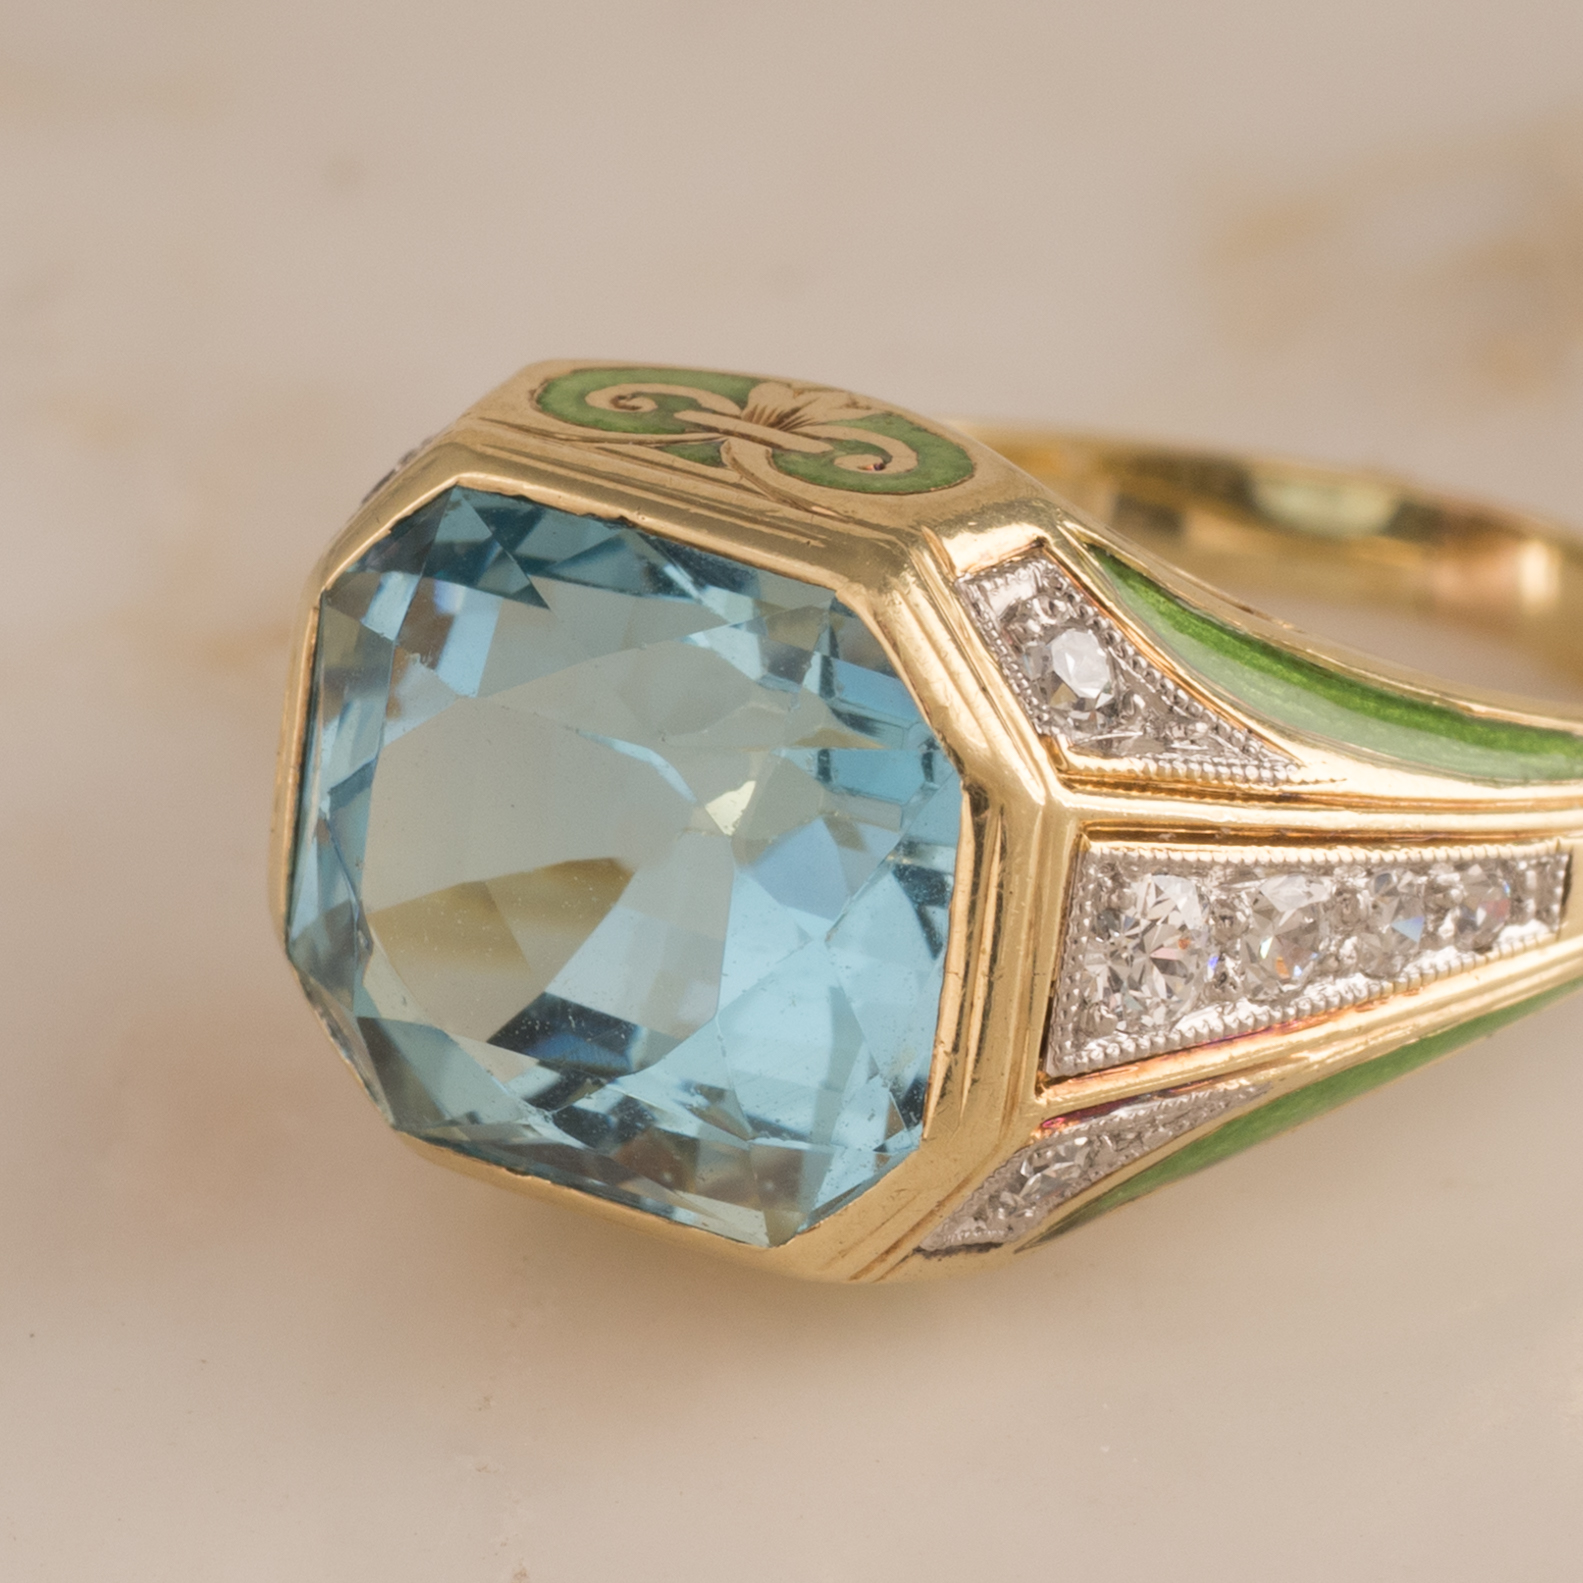 14ct yellow gold ring with a faceted emerald cut aquamarine of estimated weight 5.00ct set horizontally in an octagonal solid sided mount with grain set single and brilliant cut shoulder diamonds and green enamel features on a plain polished band. Total Estimated Aquamarine Weight: 5.00ct Total Estimated Diamond Weight: 0.22ct Colour H Clarity VS-SI Weight: 5.70grams Age: C1910